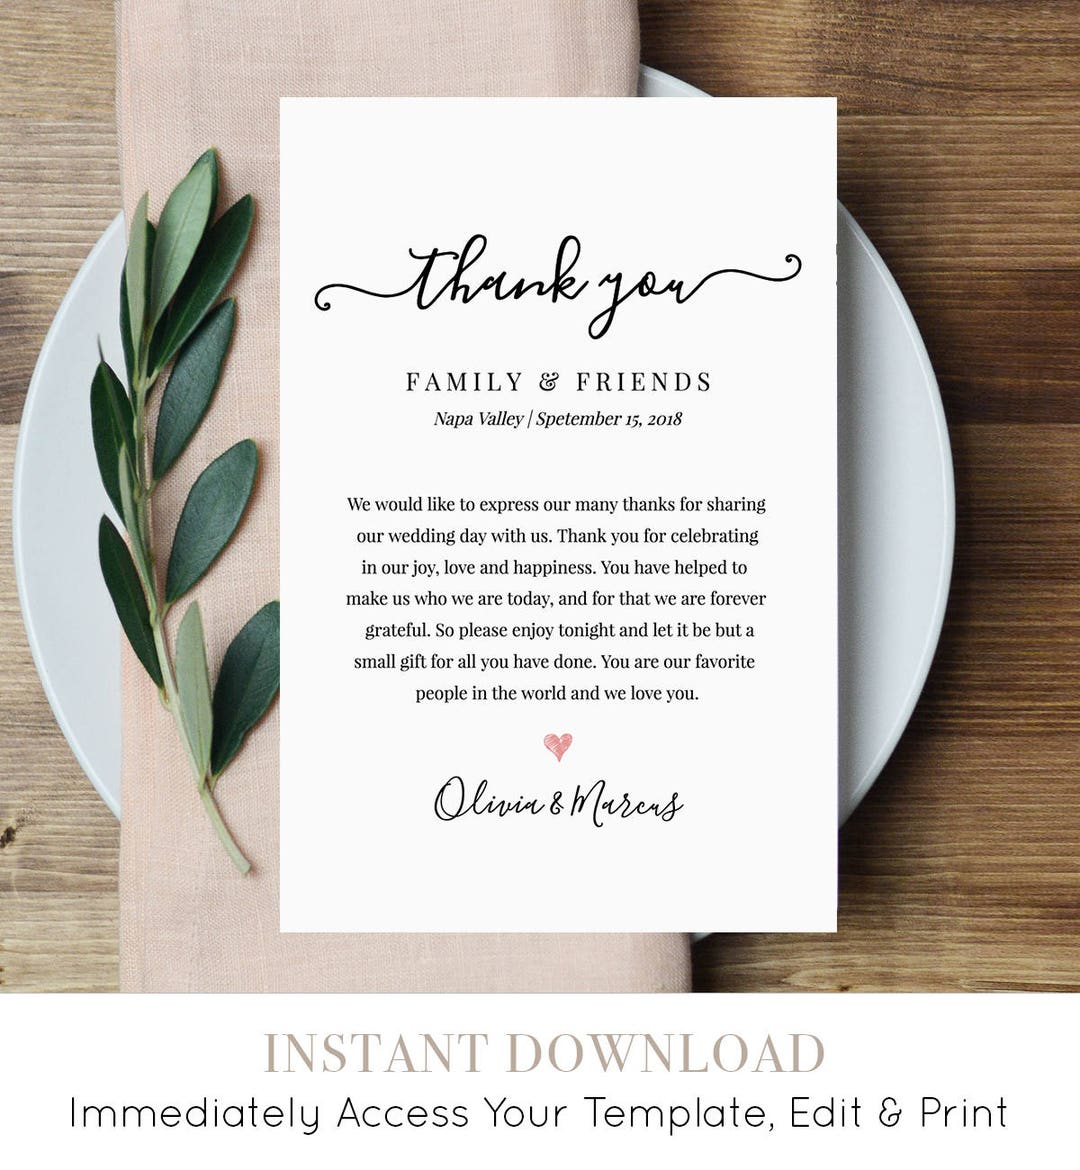 Wedding Thank You Letter Thank You Note Printable Wedding in